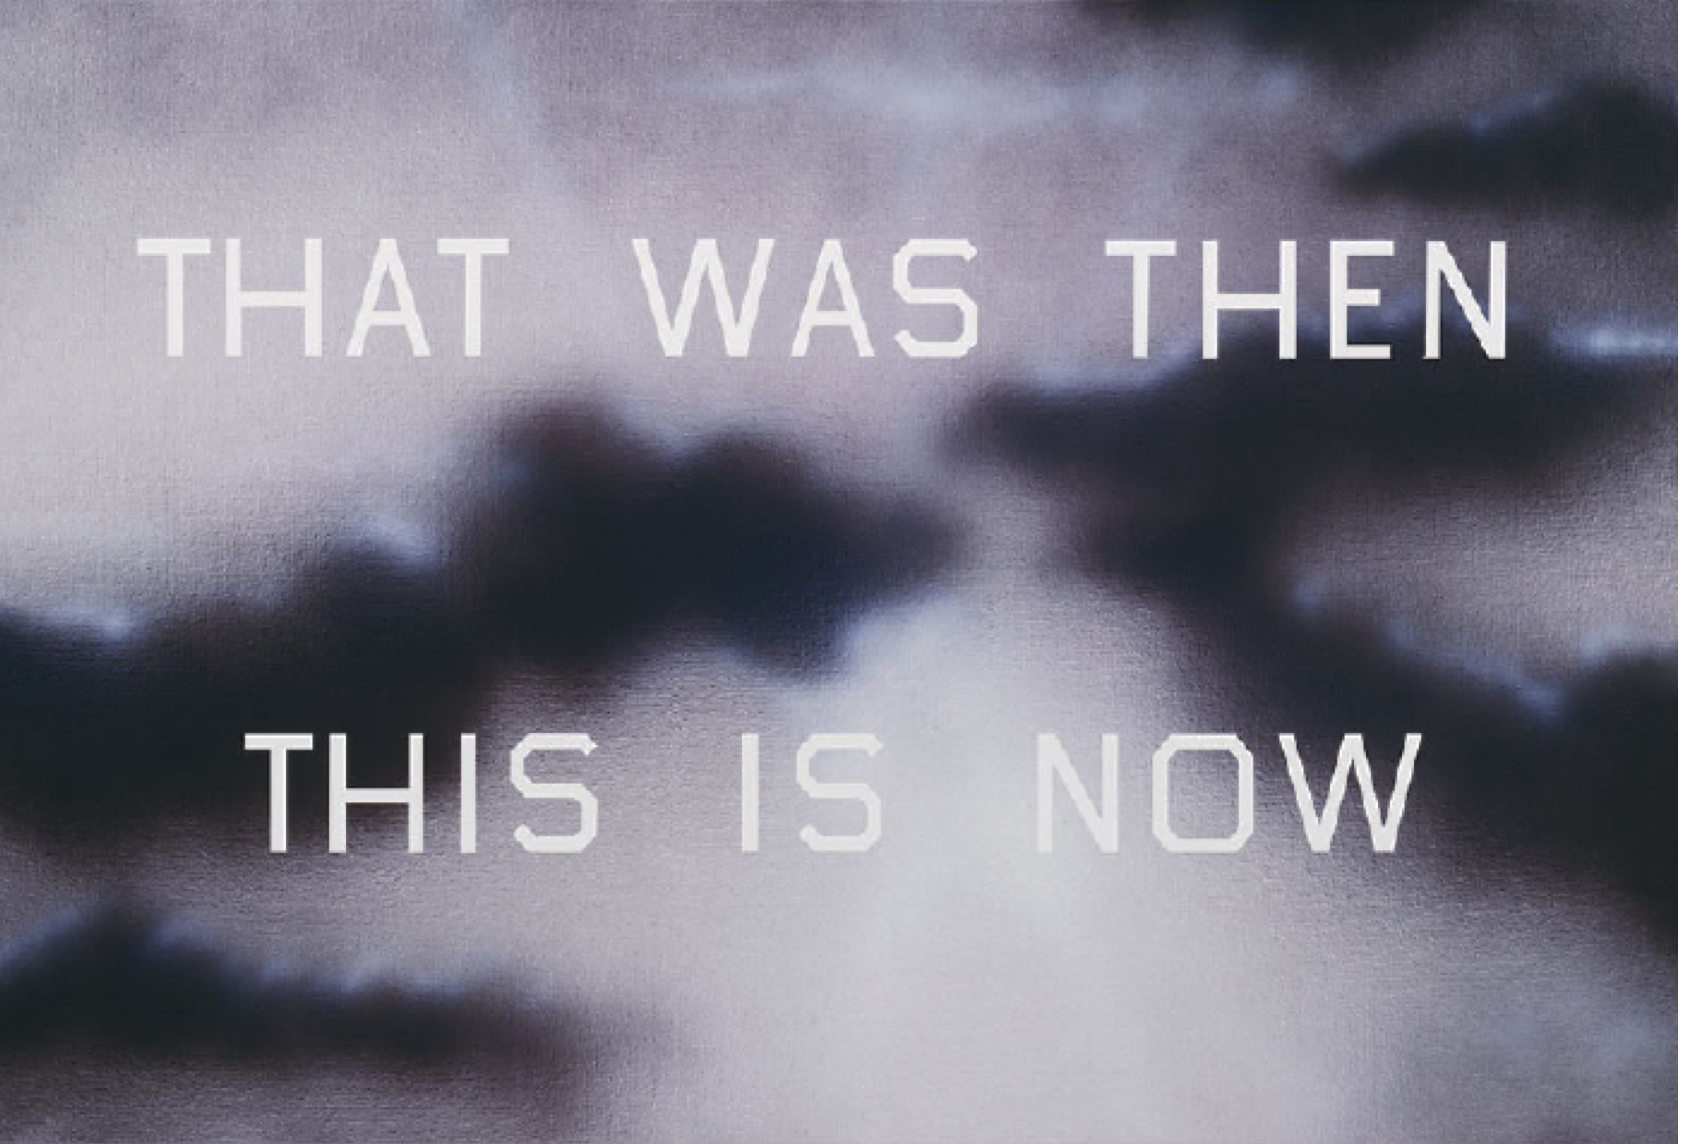  | That was then, this is now | 1